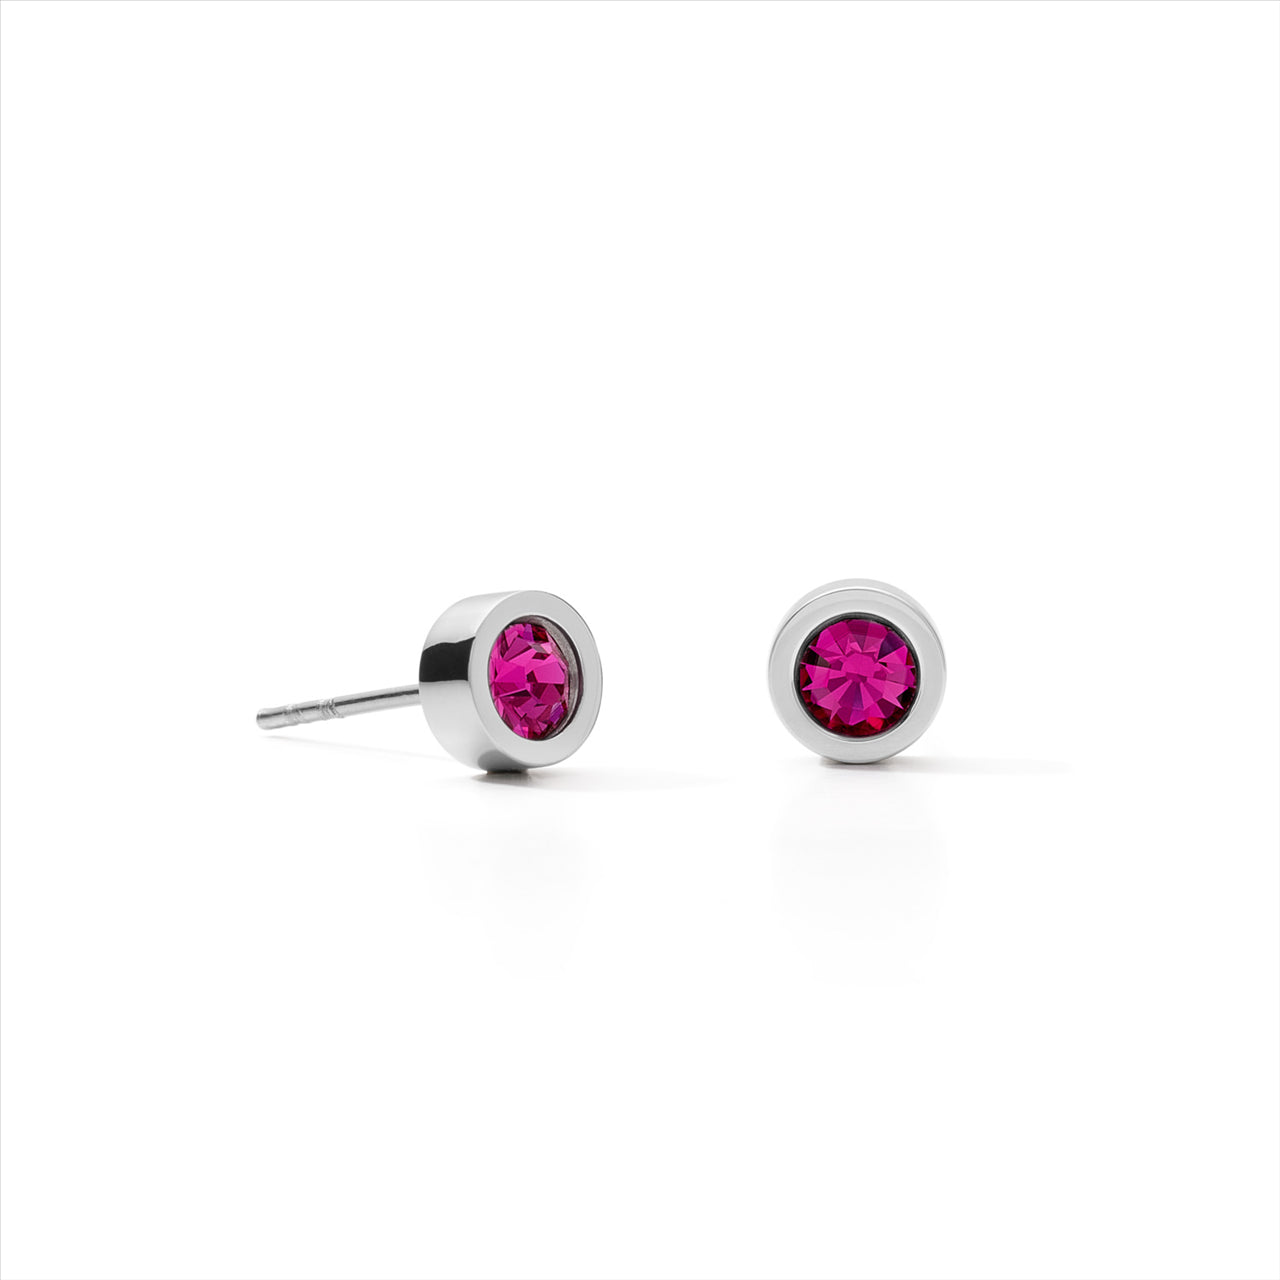 Coeur De Lion Earrings Stainless Steel With Pink Crystal Glass & Stainless Steel Stud Fittings